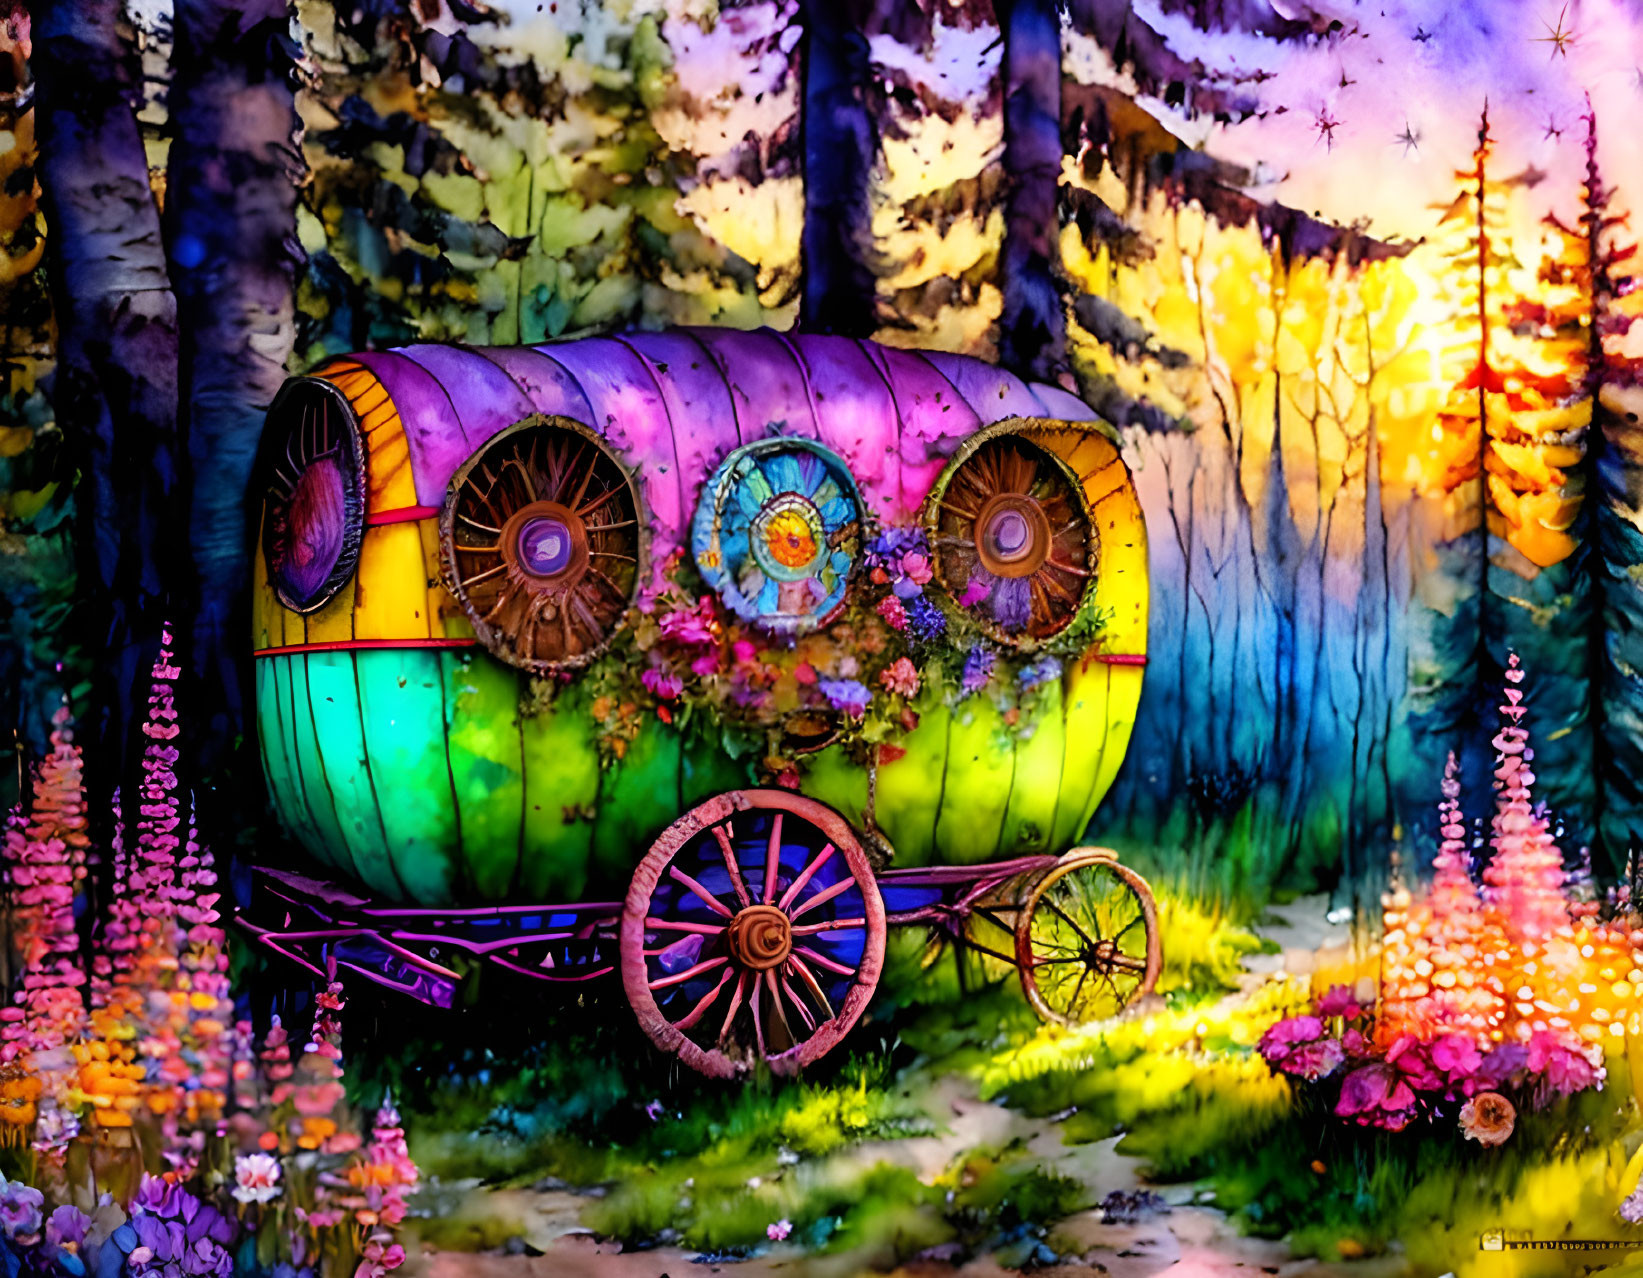 Colorful whimsical caravan with floral adornments in enchanting forest at twilight